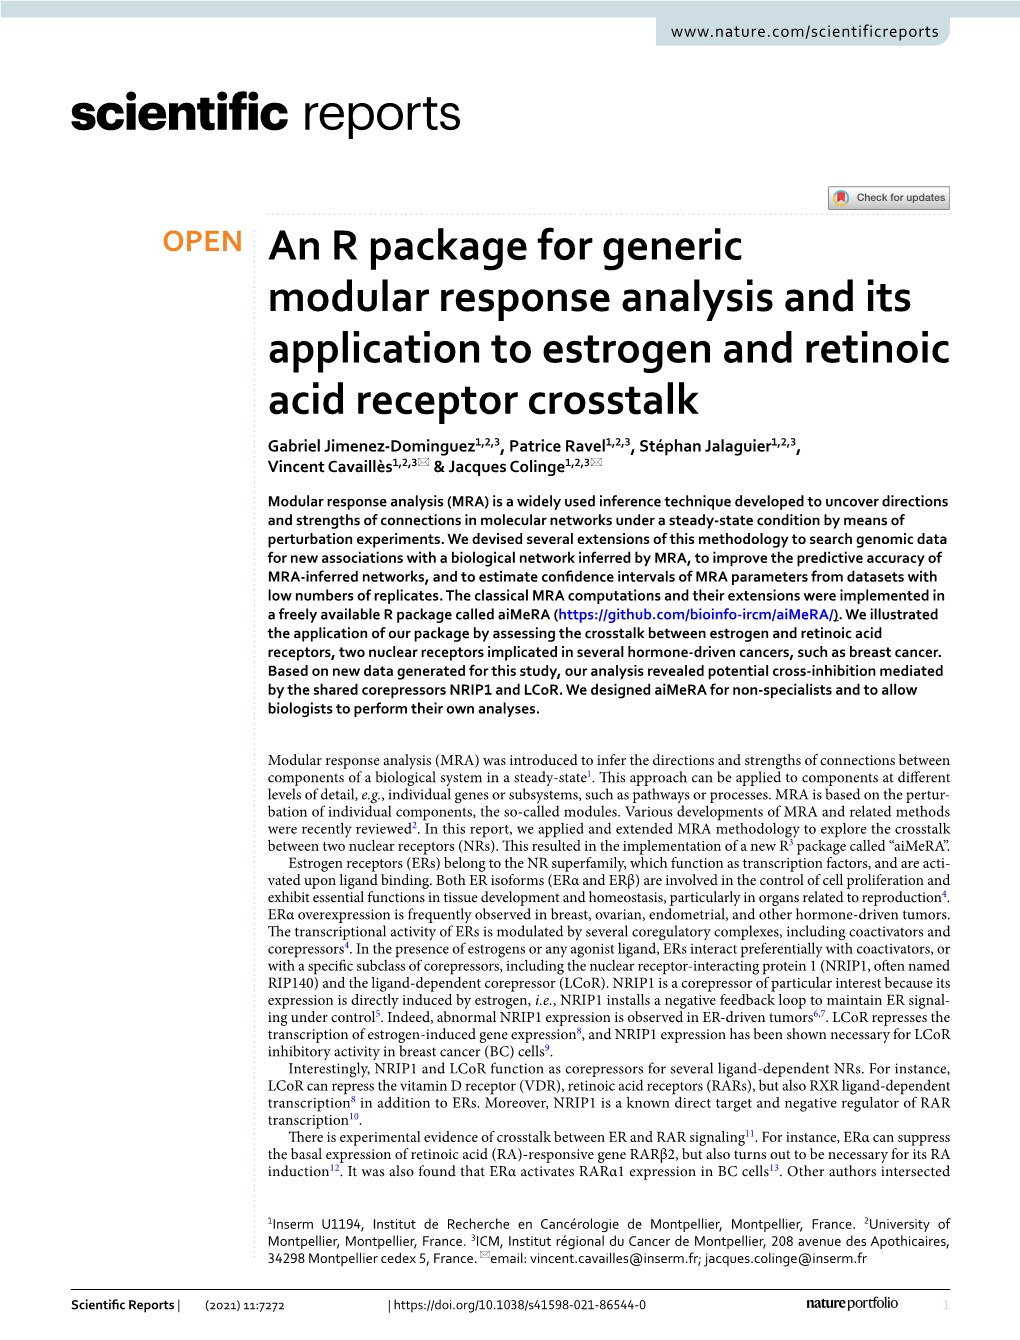 An R Package for Generic Modular Response Analysis and Its Application to Estrogen and Retinoic Acid Receptor Crosstalk